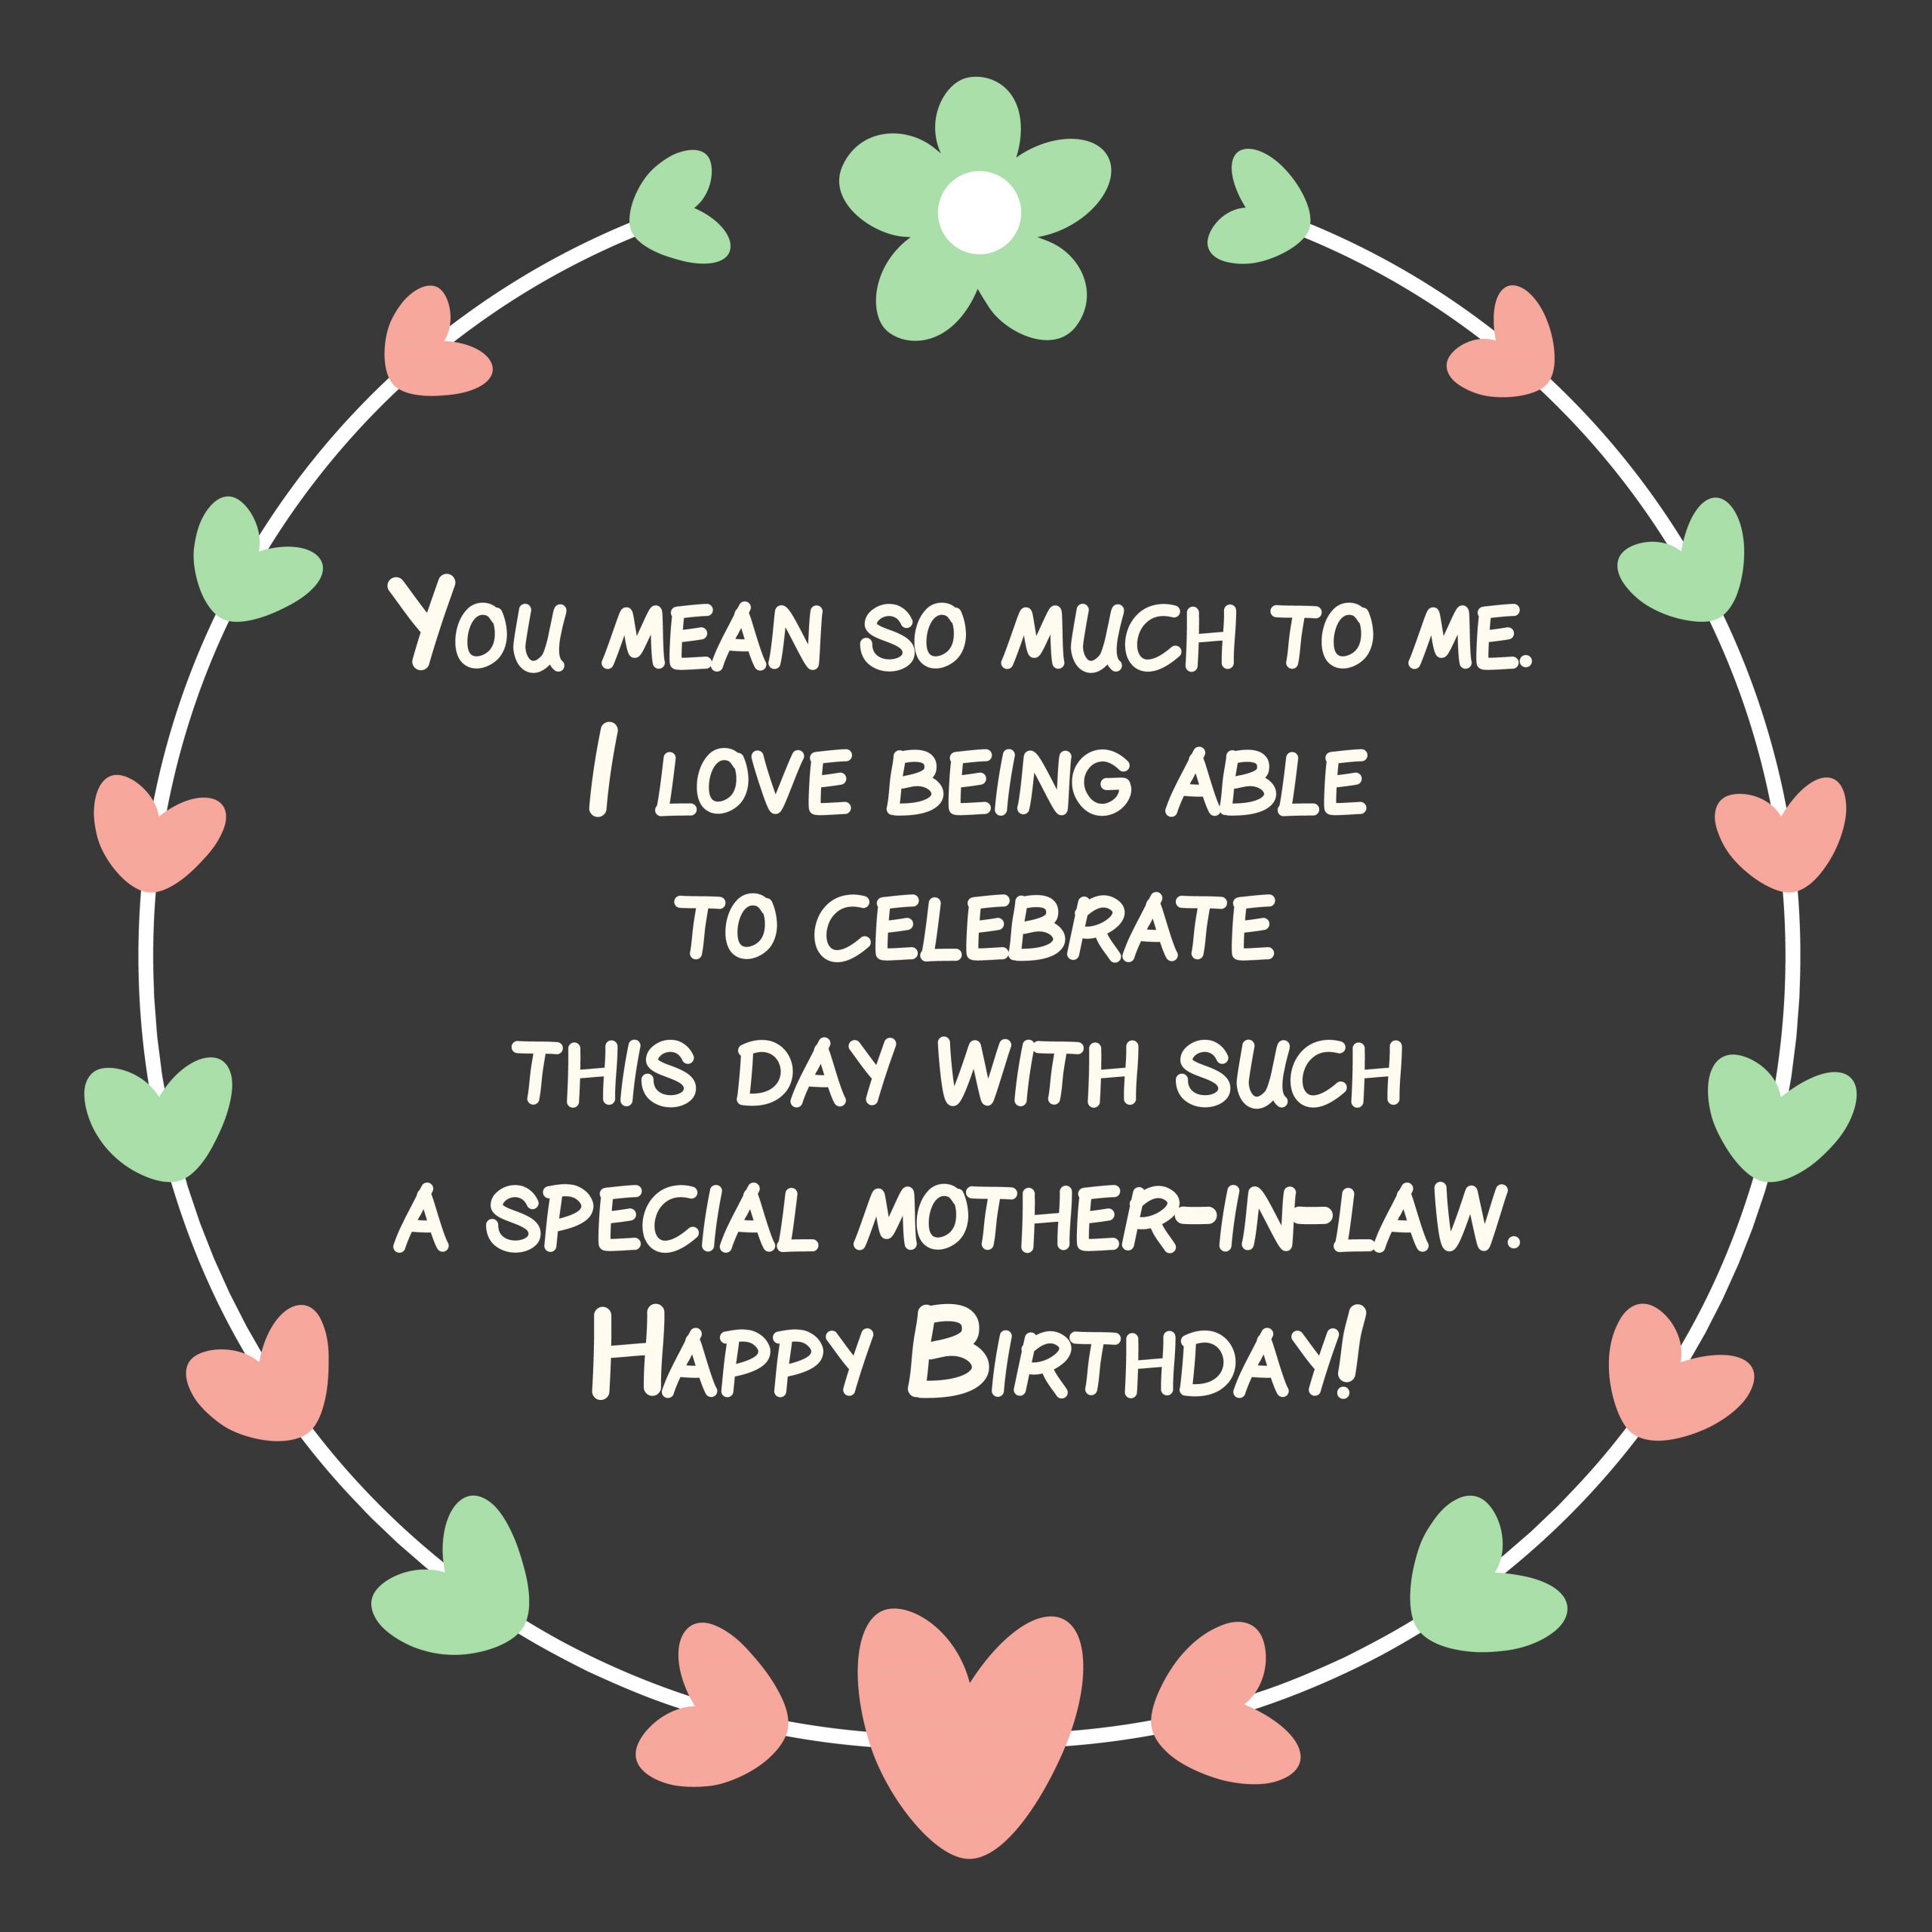 Happy Birthday Quote For Mother In Law
 The 200 Happy Birthday Mother in Law Quotes – Top Happy